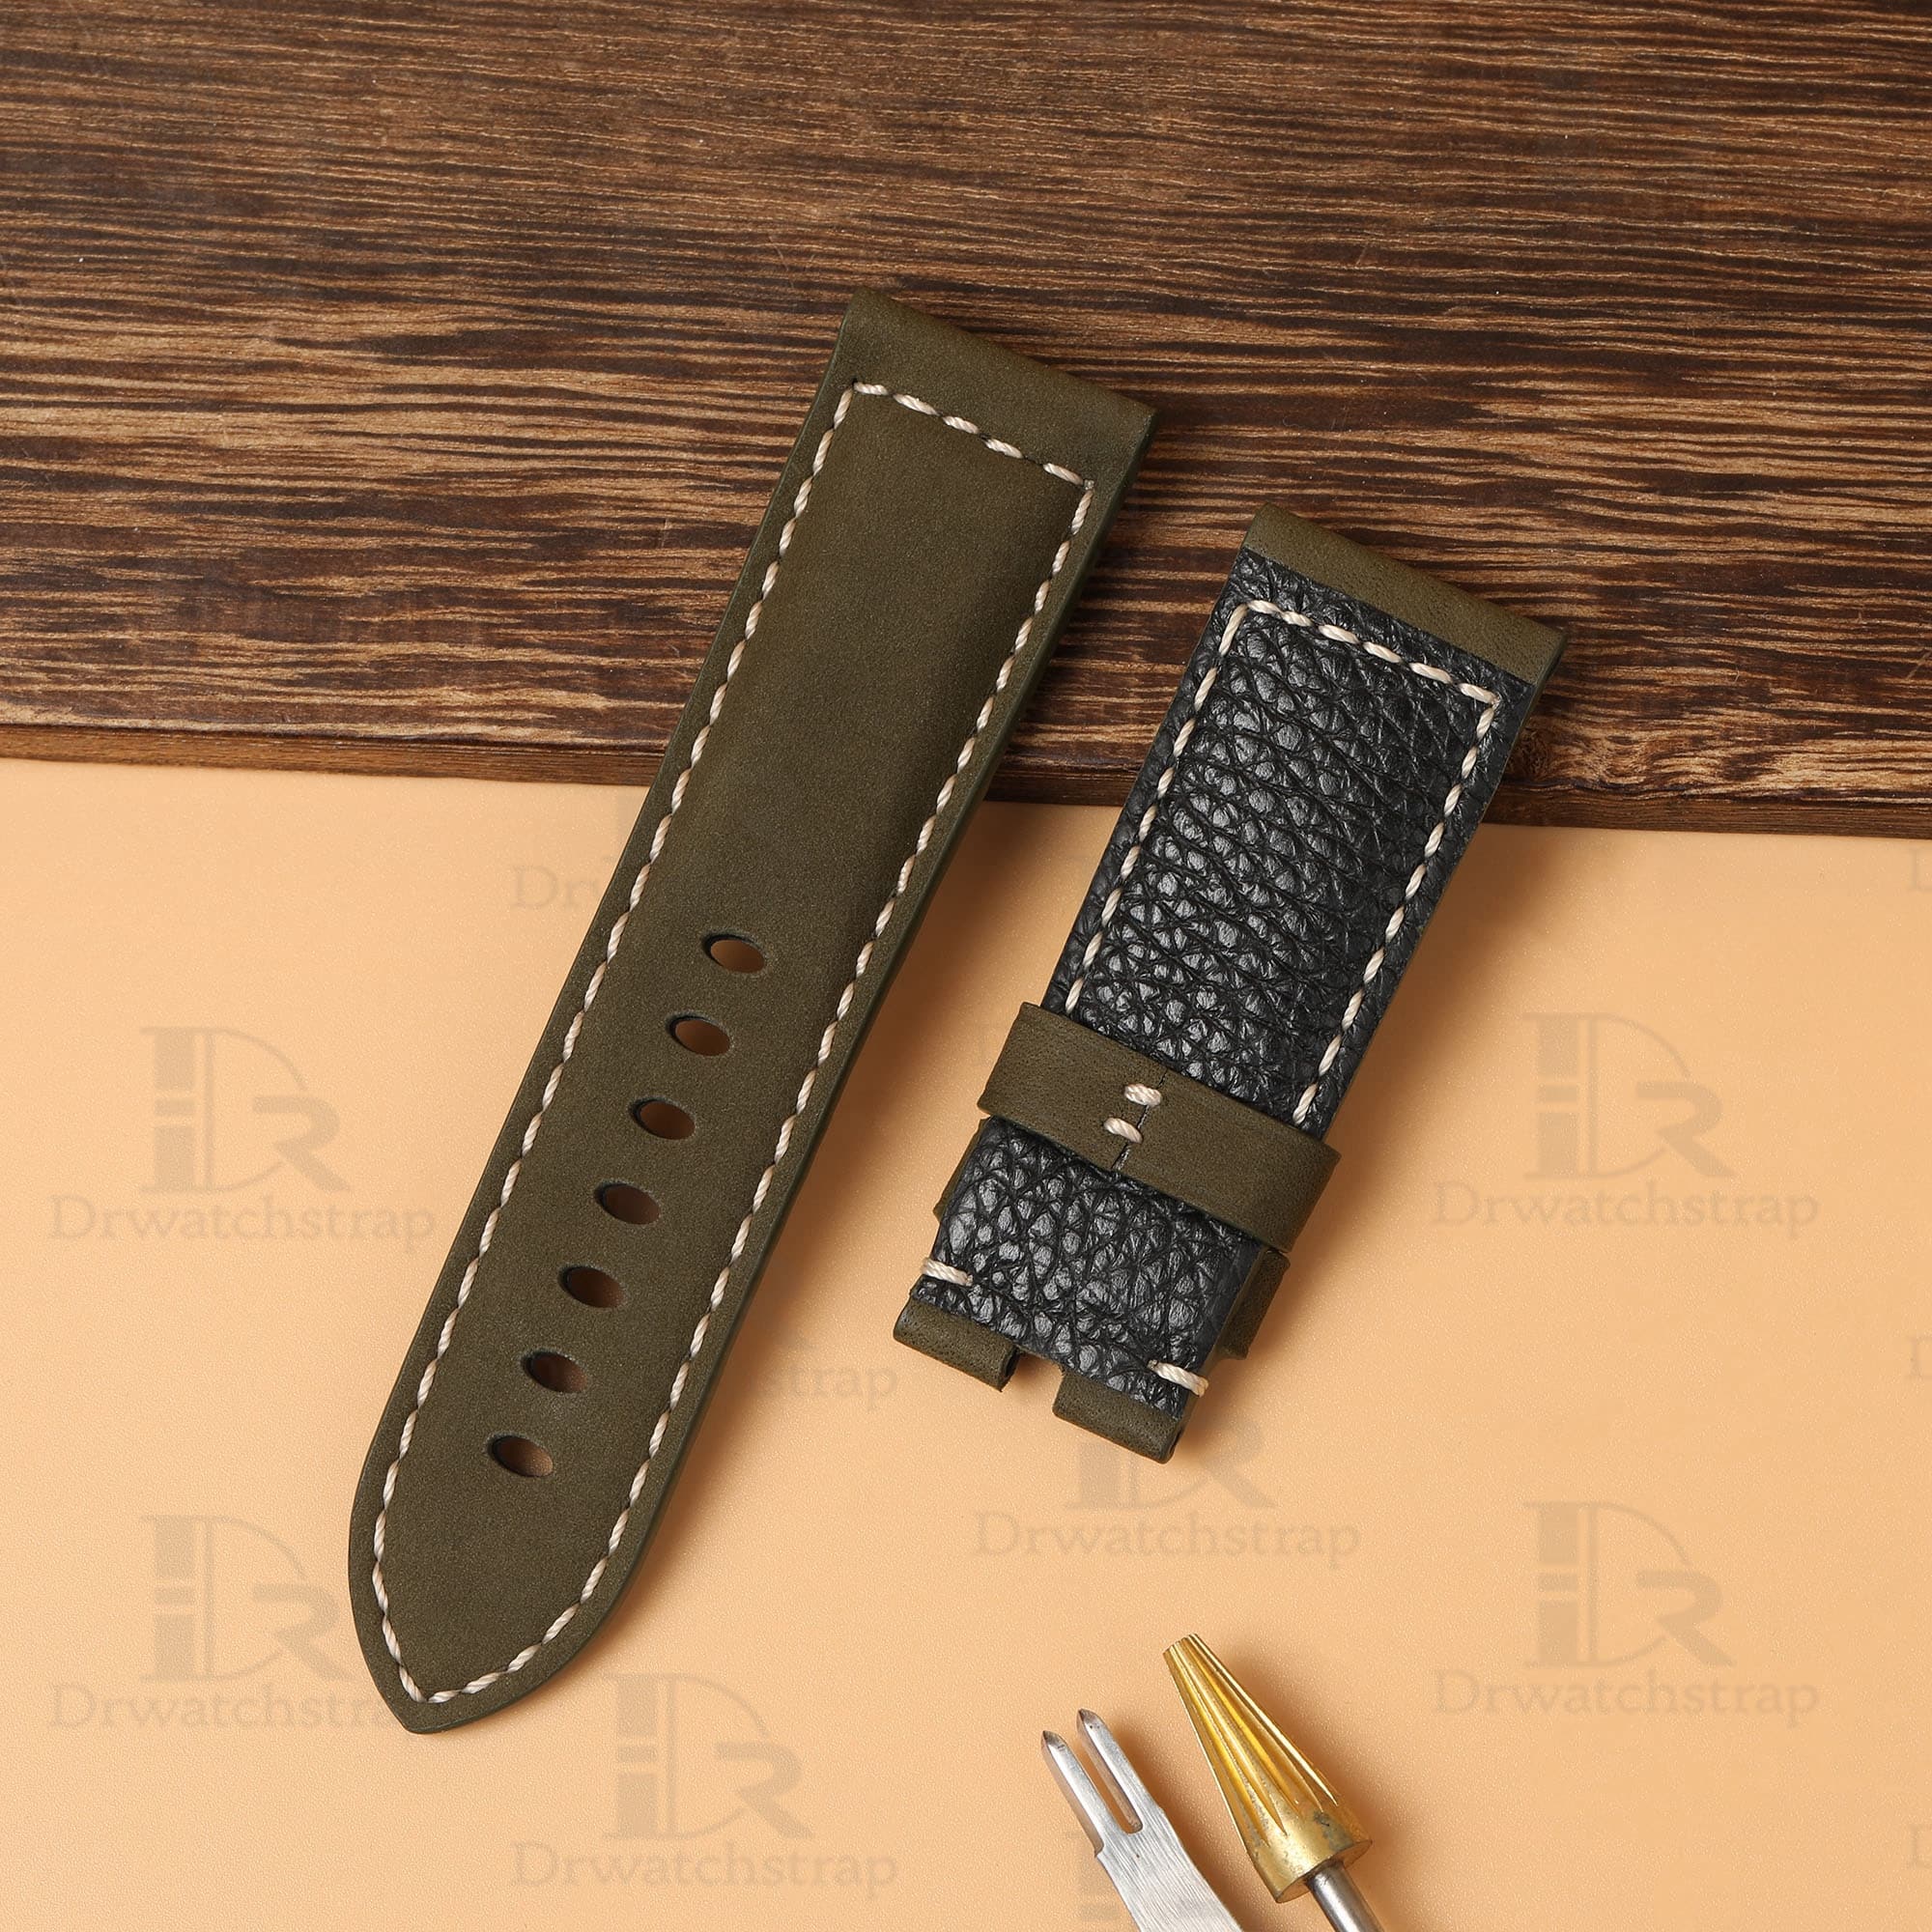 Custom aftermarket OEM best calfskin Oliver green Panerai leather watch straps & watch bands 22mm 24mm 26mm replacement for Panerai Luminor Marina, Radiomir, Submersible luxury watches - Shop the premium best calfskin material leather strap and watch band from Dr watchstrap at a low price